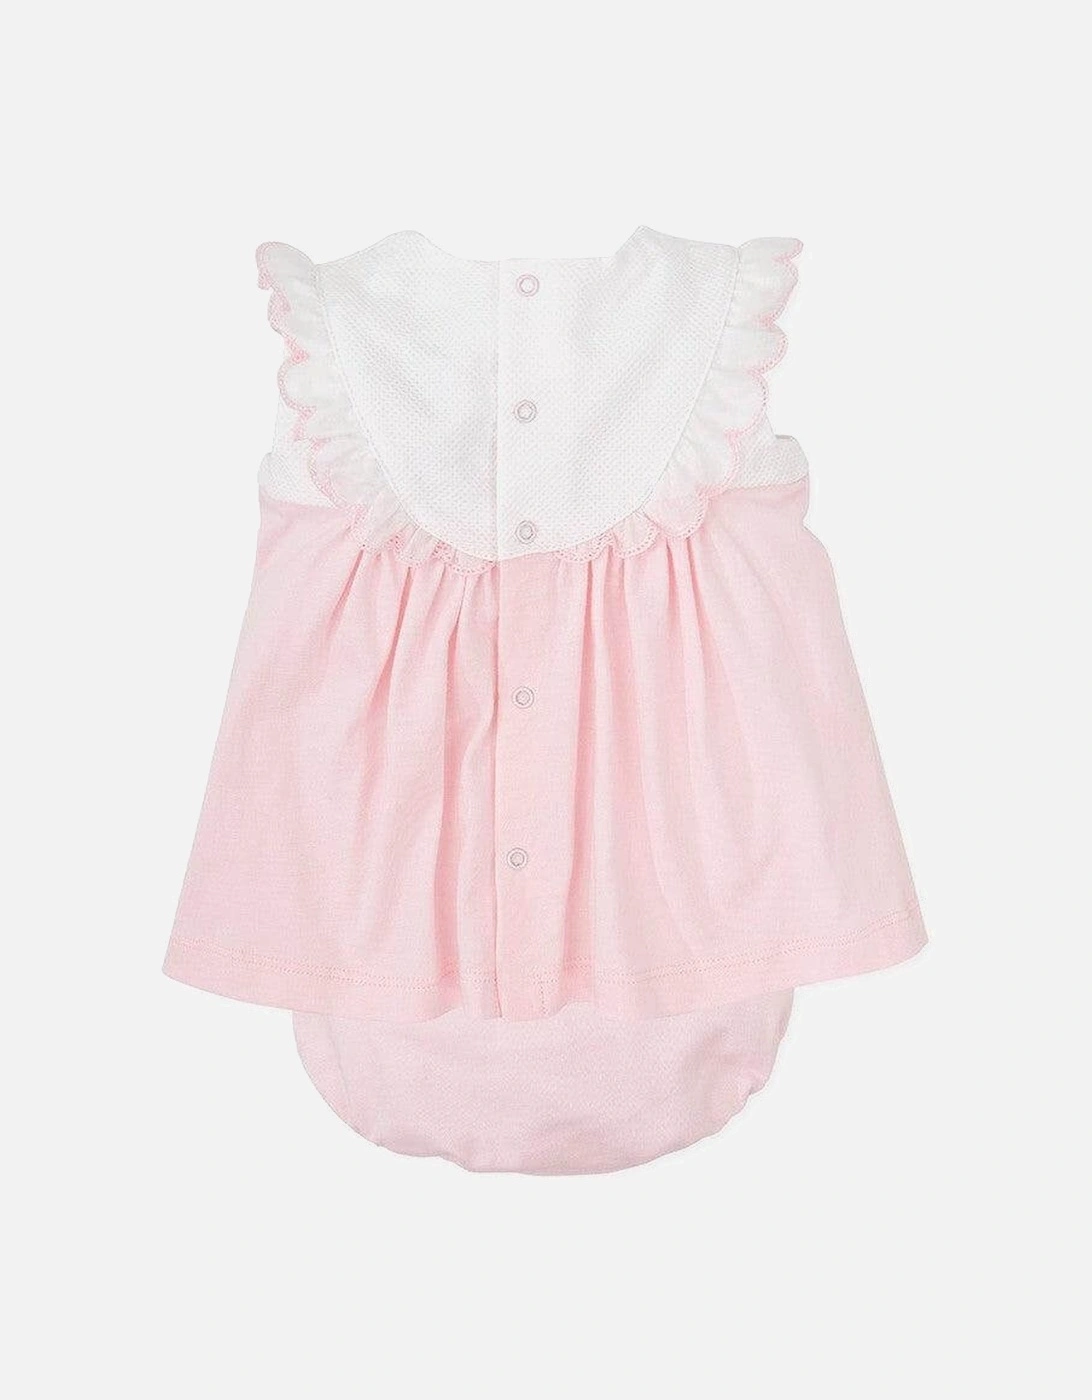 Girls Pink Embroided Dress With Bloomers